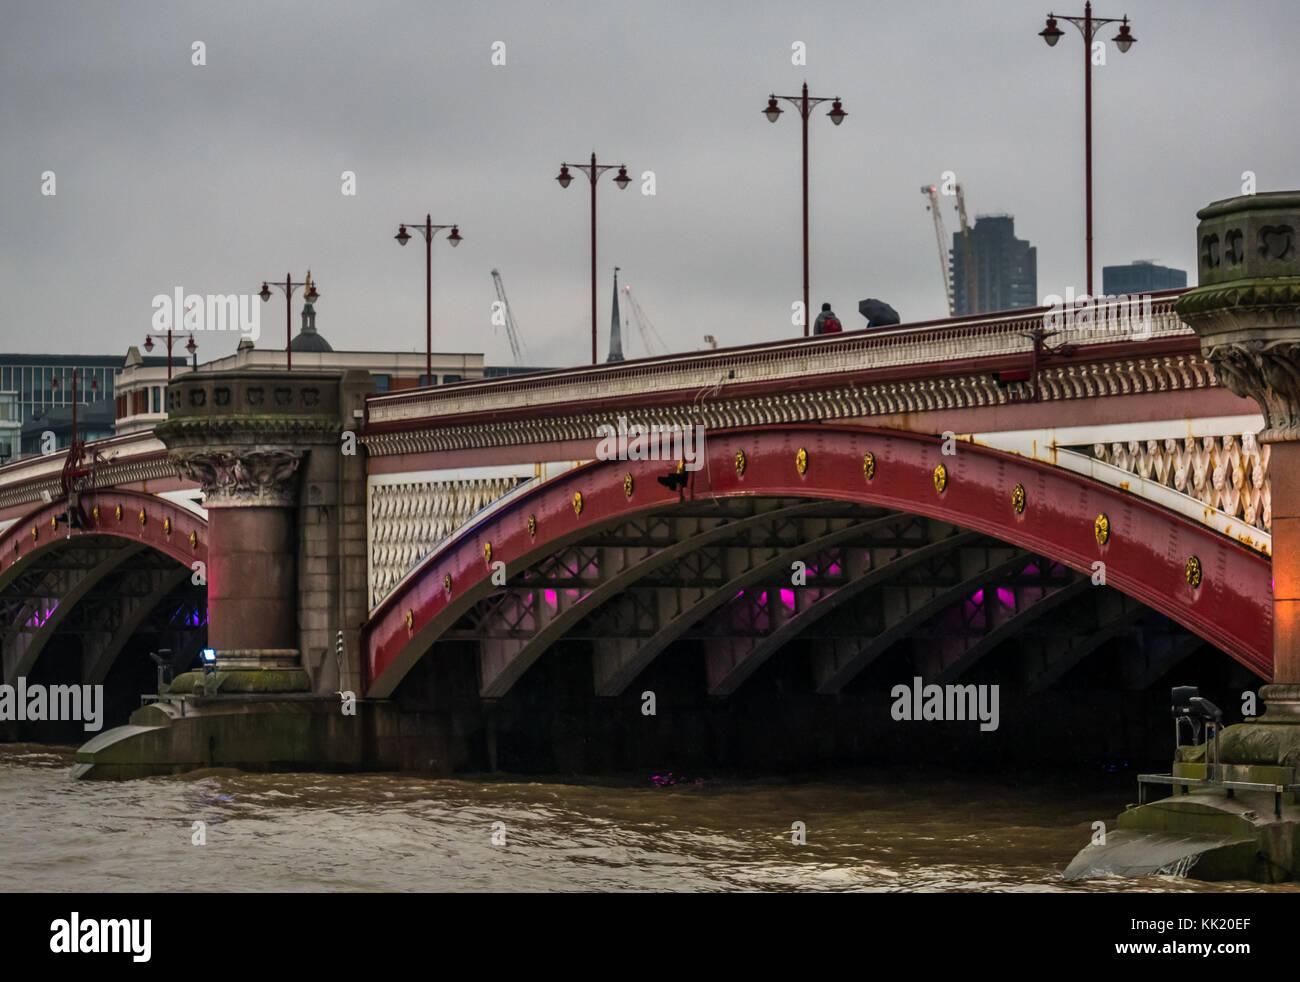 View of people walking on Blackfriars Bridge over River Thames, with ornate old fashioned lamp posts, London, England, UK, on grey rainy day Stock Photo